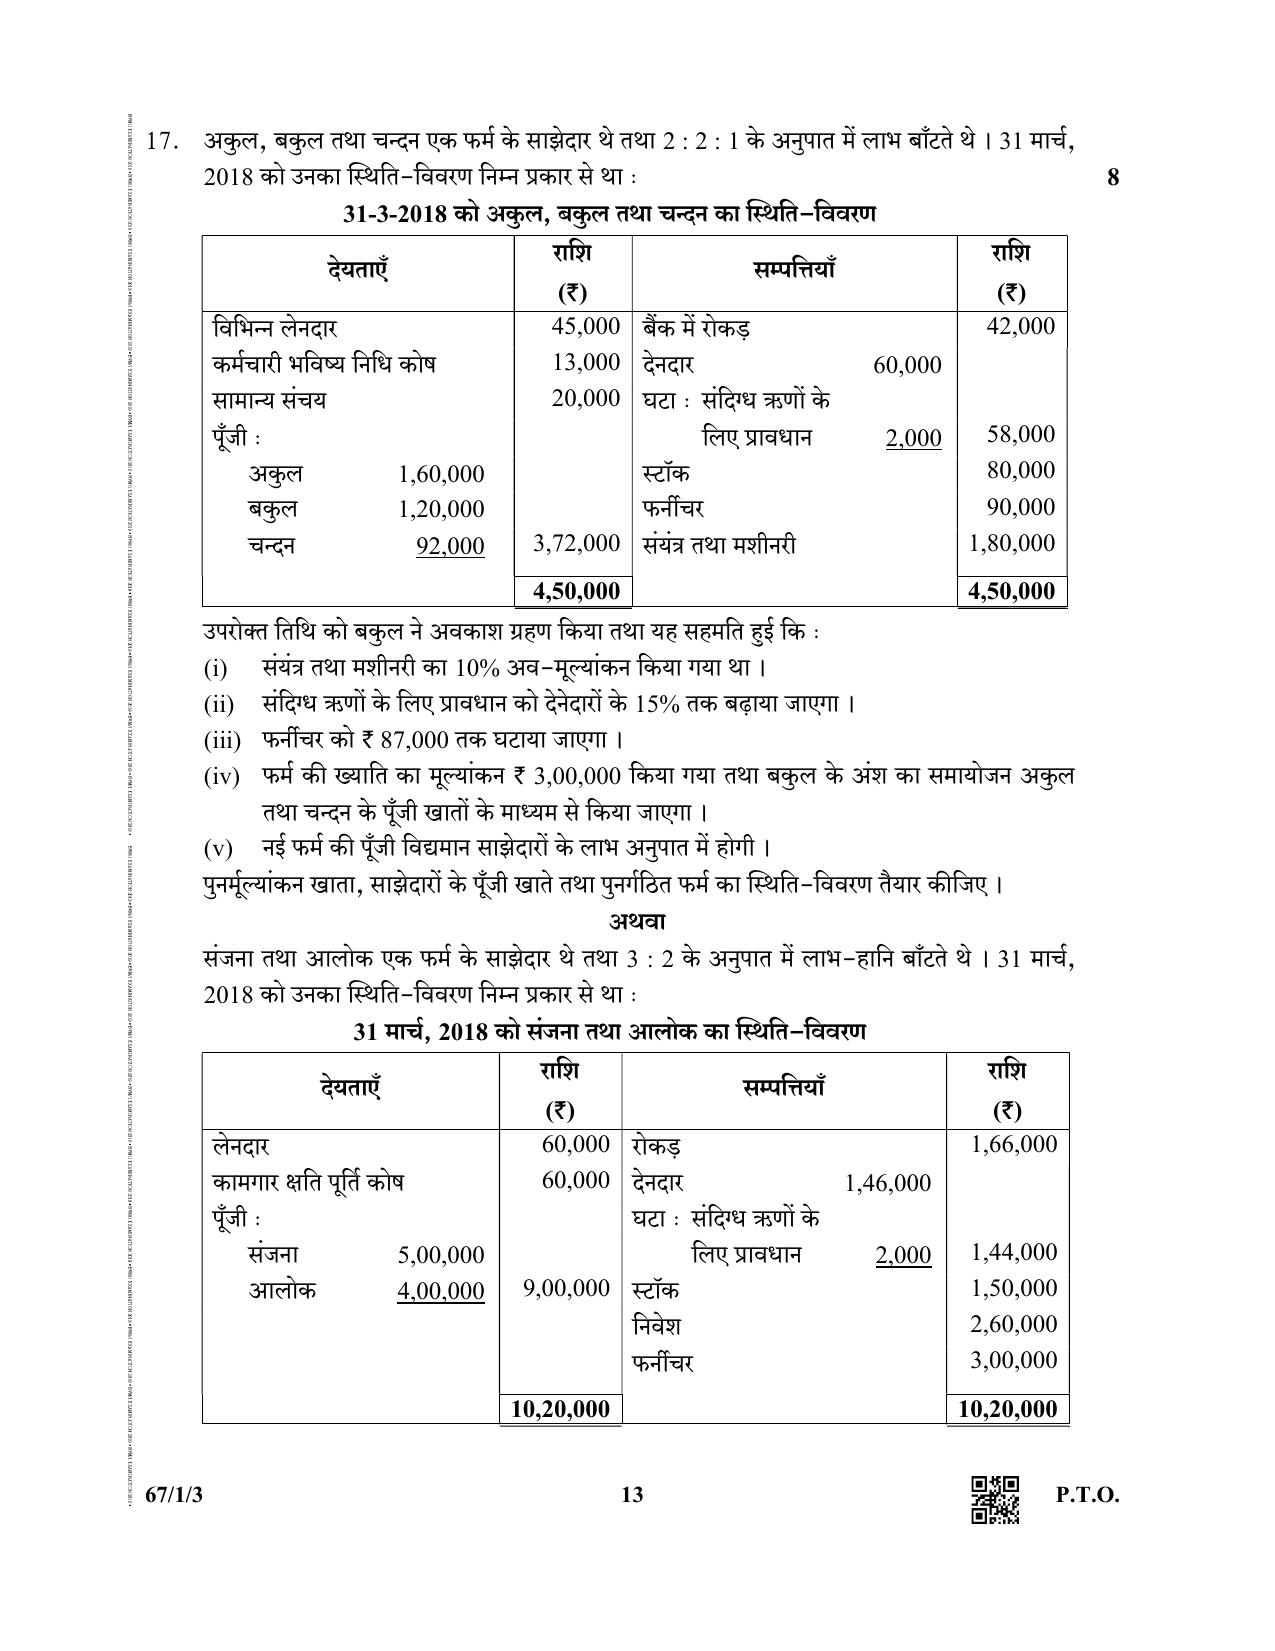 CBSE Class 12 67-1-3  (Accountancy) 2019 Question Paper - Page 13